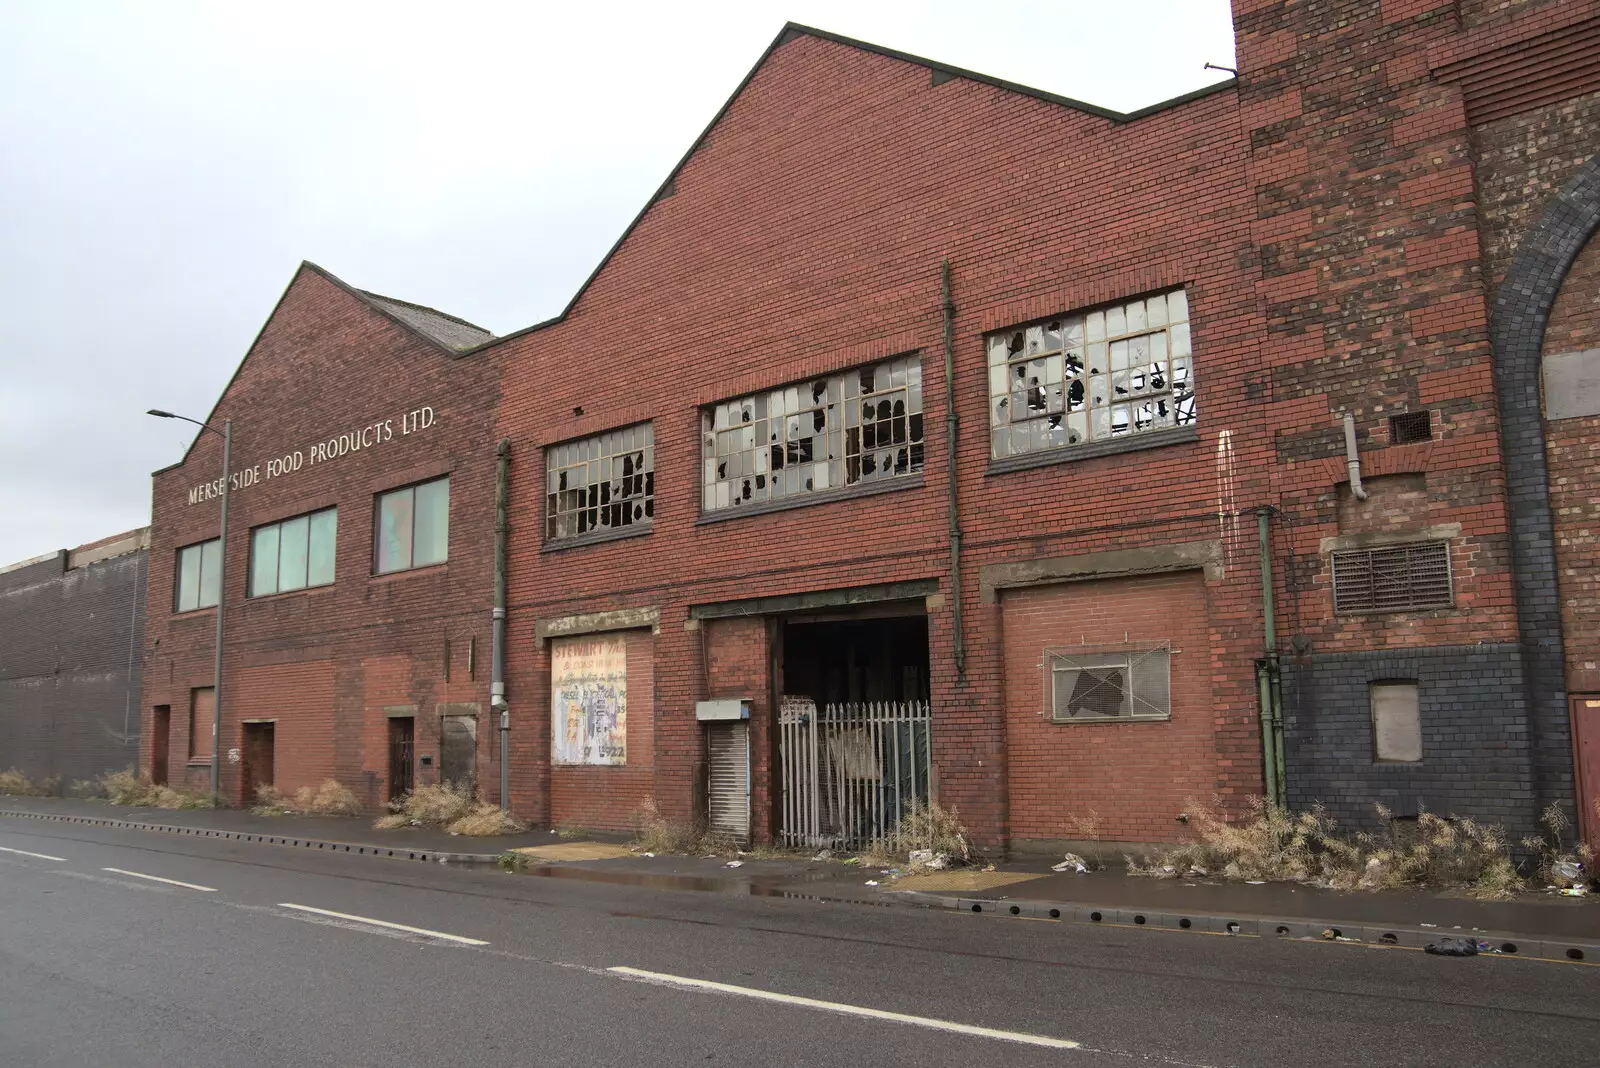 The derelict Merseyside Food Products building, from Pork Pies and Dockside Dereliction, Melton Mowbray and Liverpool - 7th August 2021